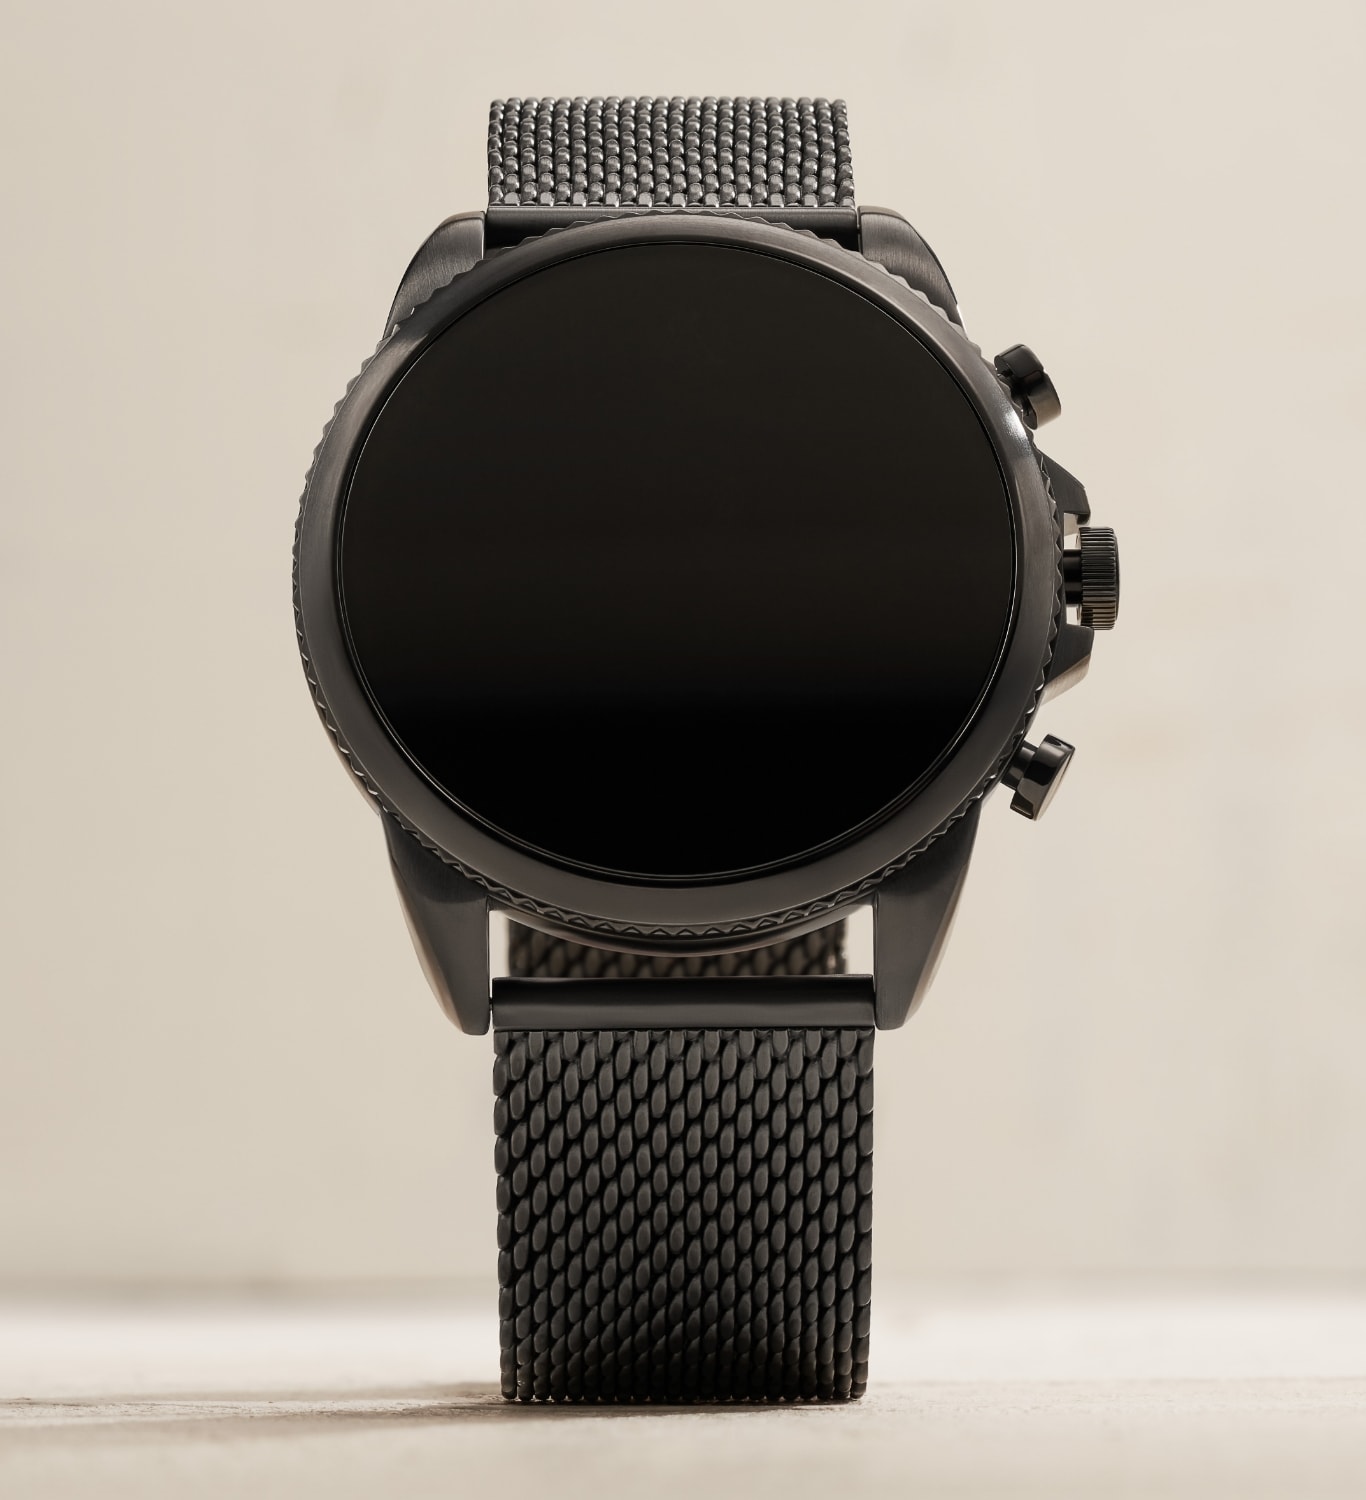 Fossil Gen 6 Smartwatch Range With Snapdragon 4100+, SpO2 Sensor Launched:  Price, Specifications